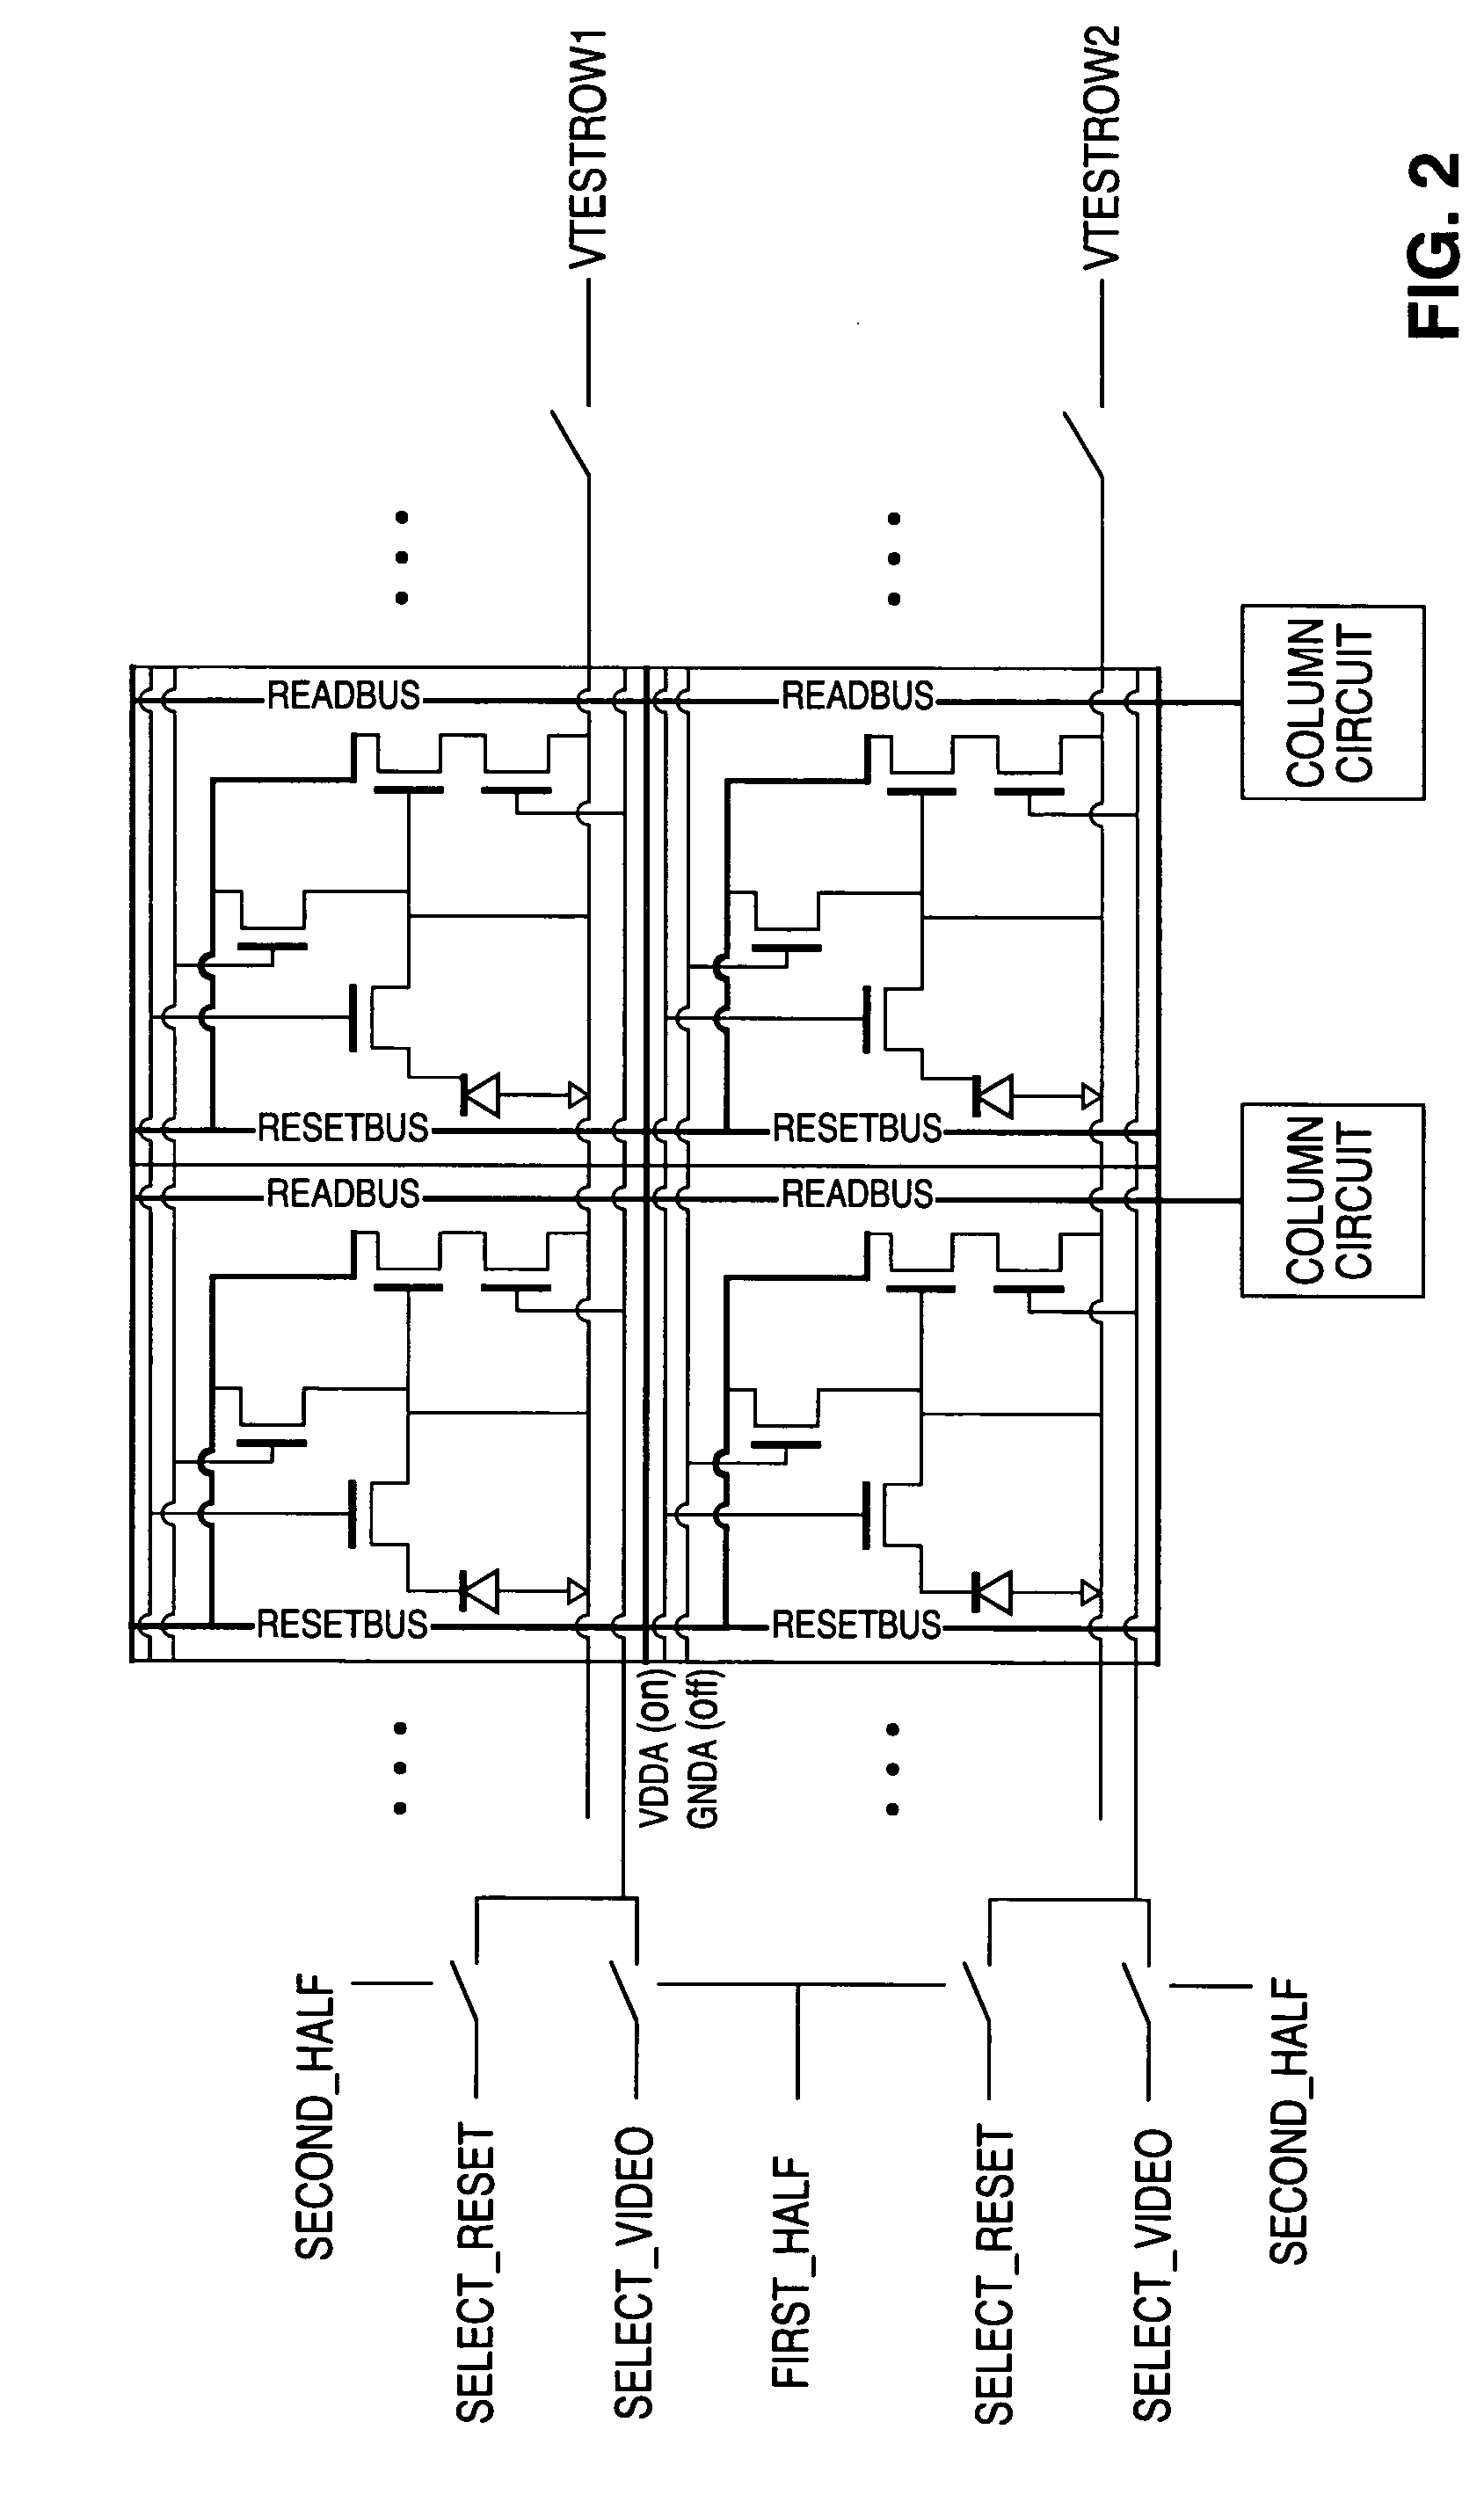 Apparatus and method for column fixed pattern noise (FPN) correction